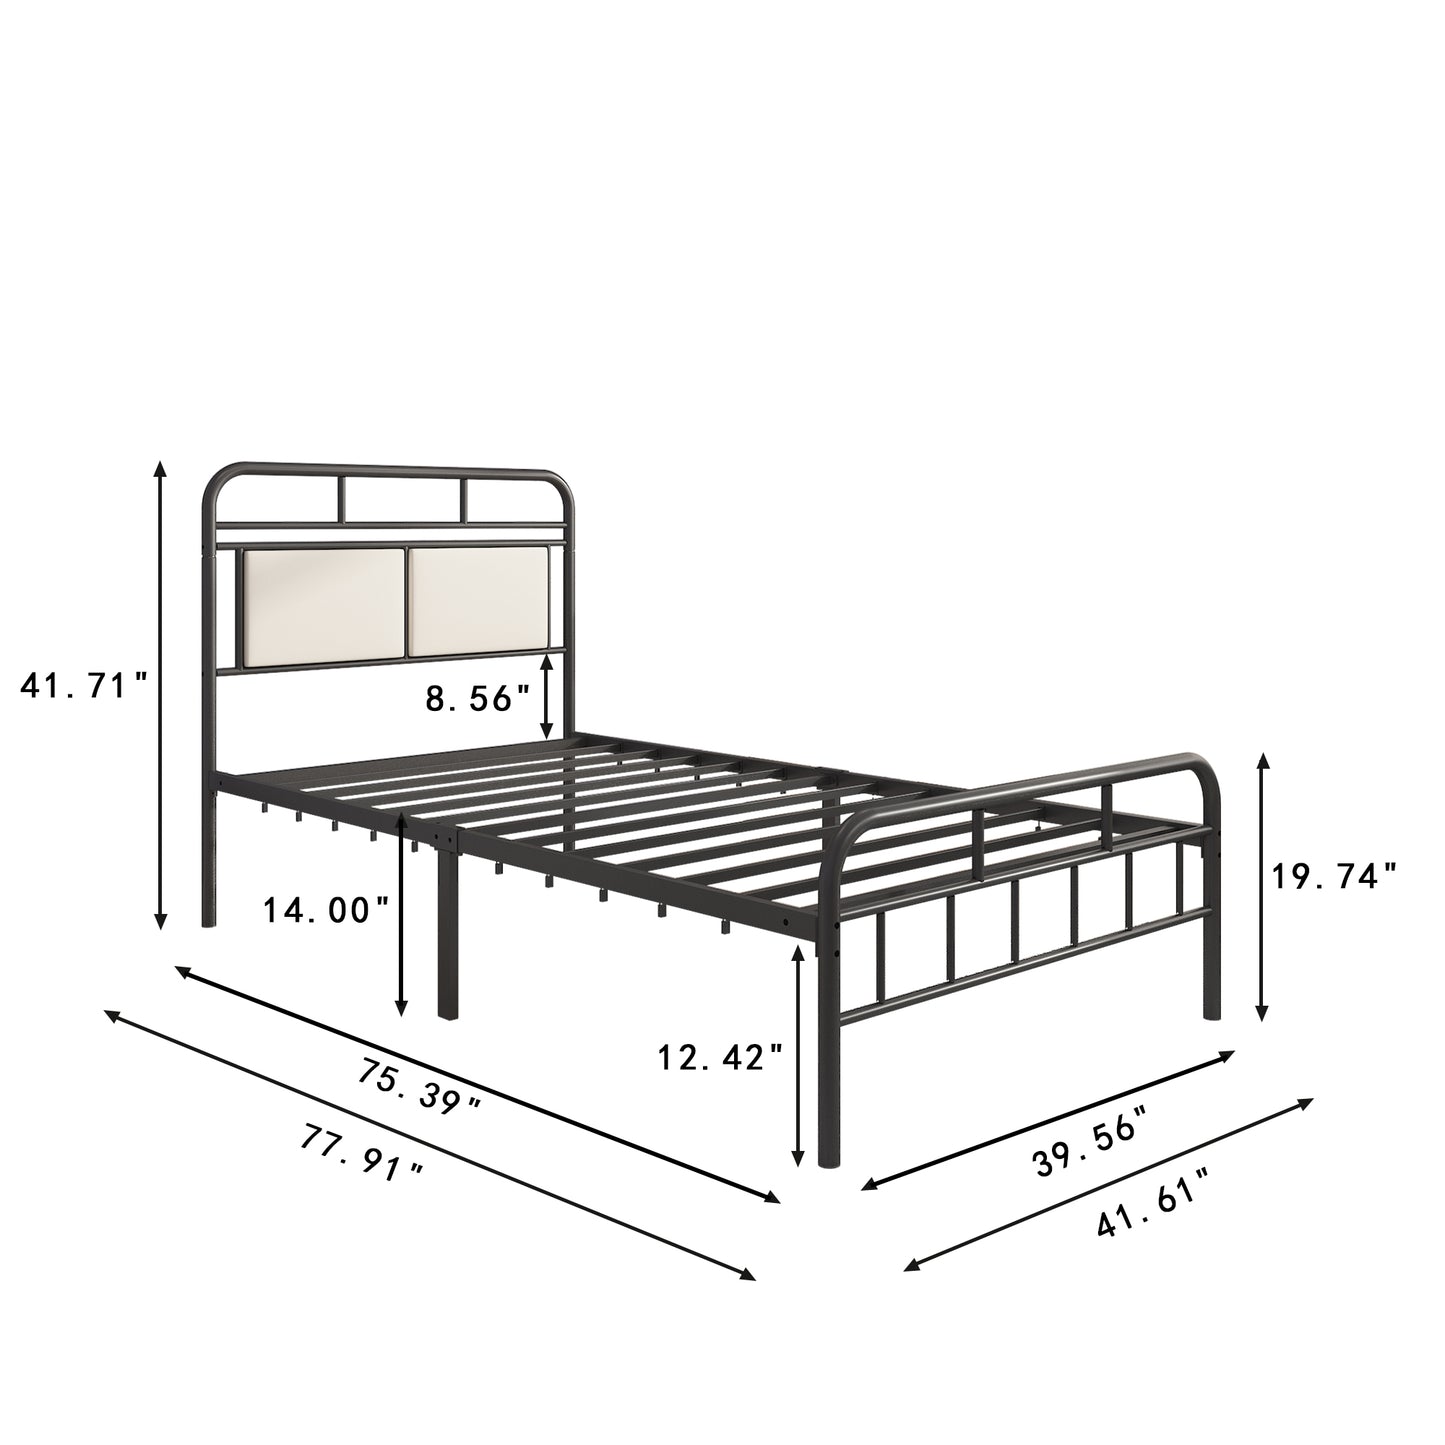 SYNGAR Black Iron Platform Bed Frame Twin Size with Upholstered Headboard, Footboard, Metal Twin Bed Frame Mattress Foundation with 400LBS Load Capacity, No Box Spring Needed, Easy Assembly